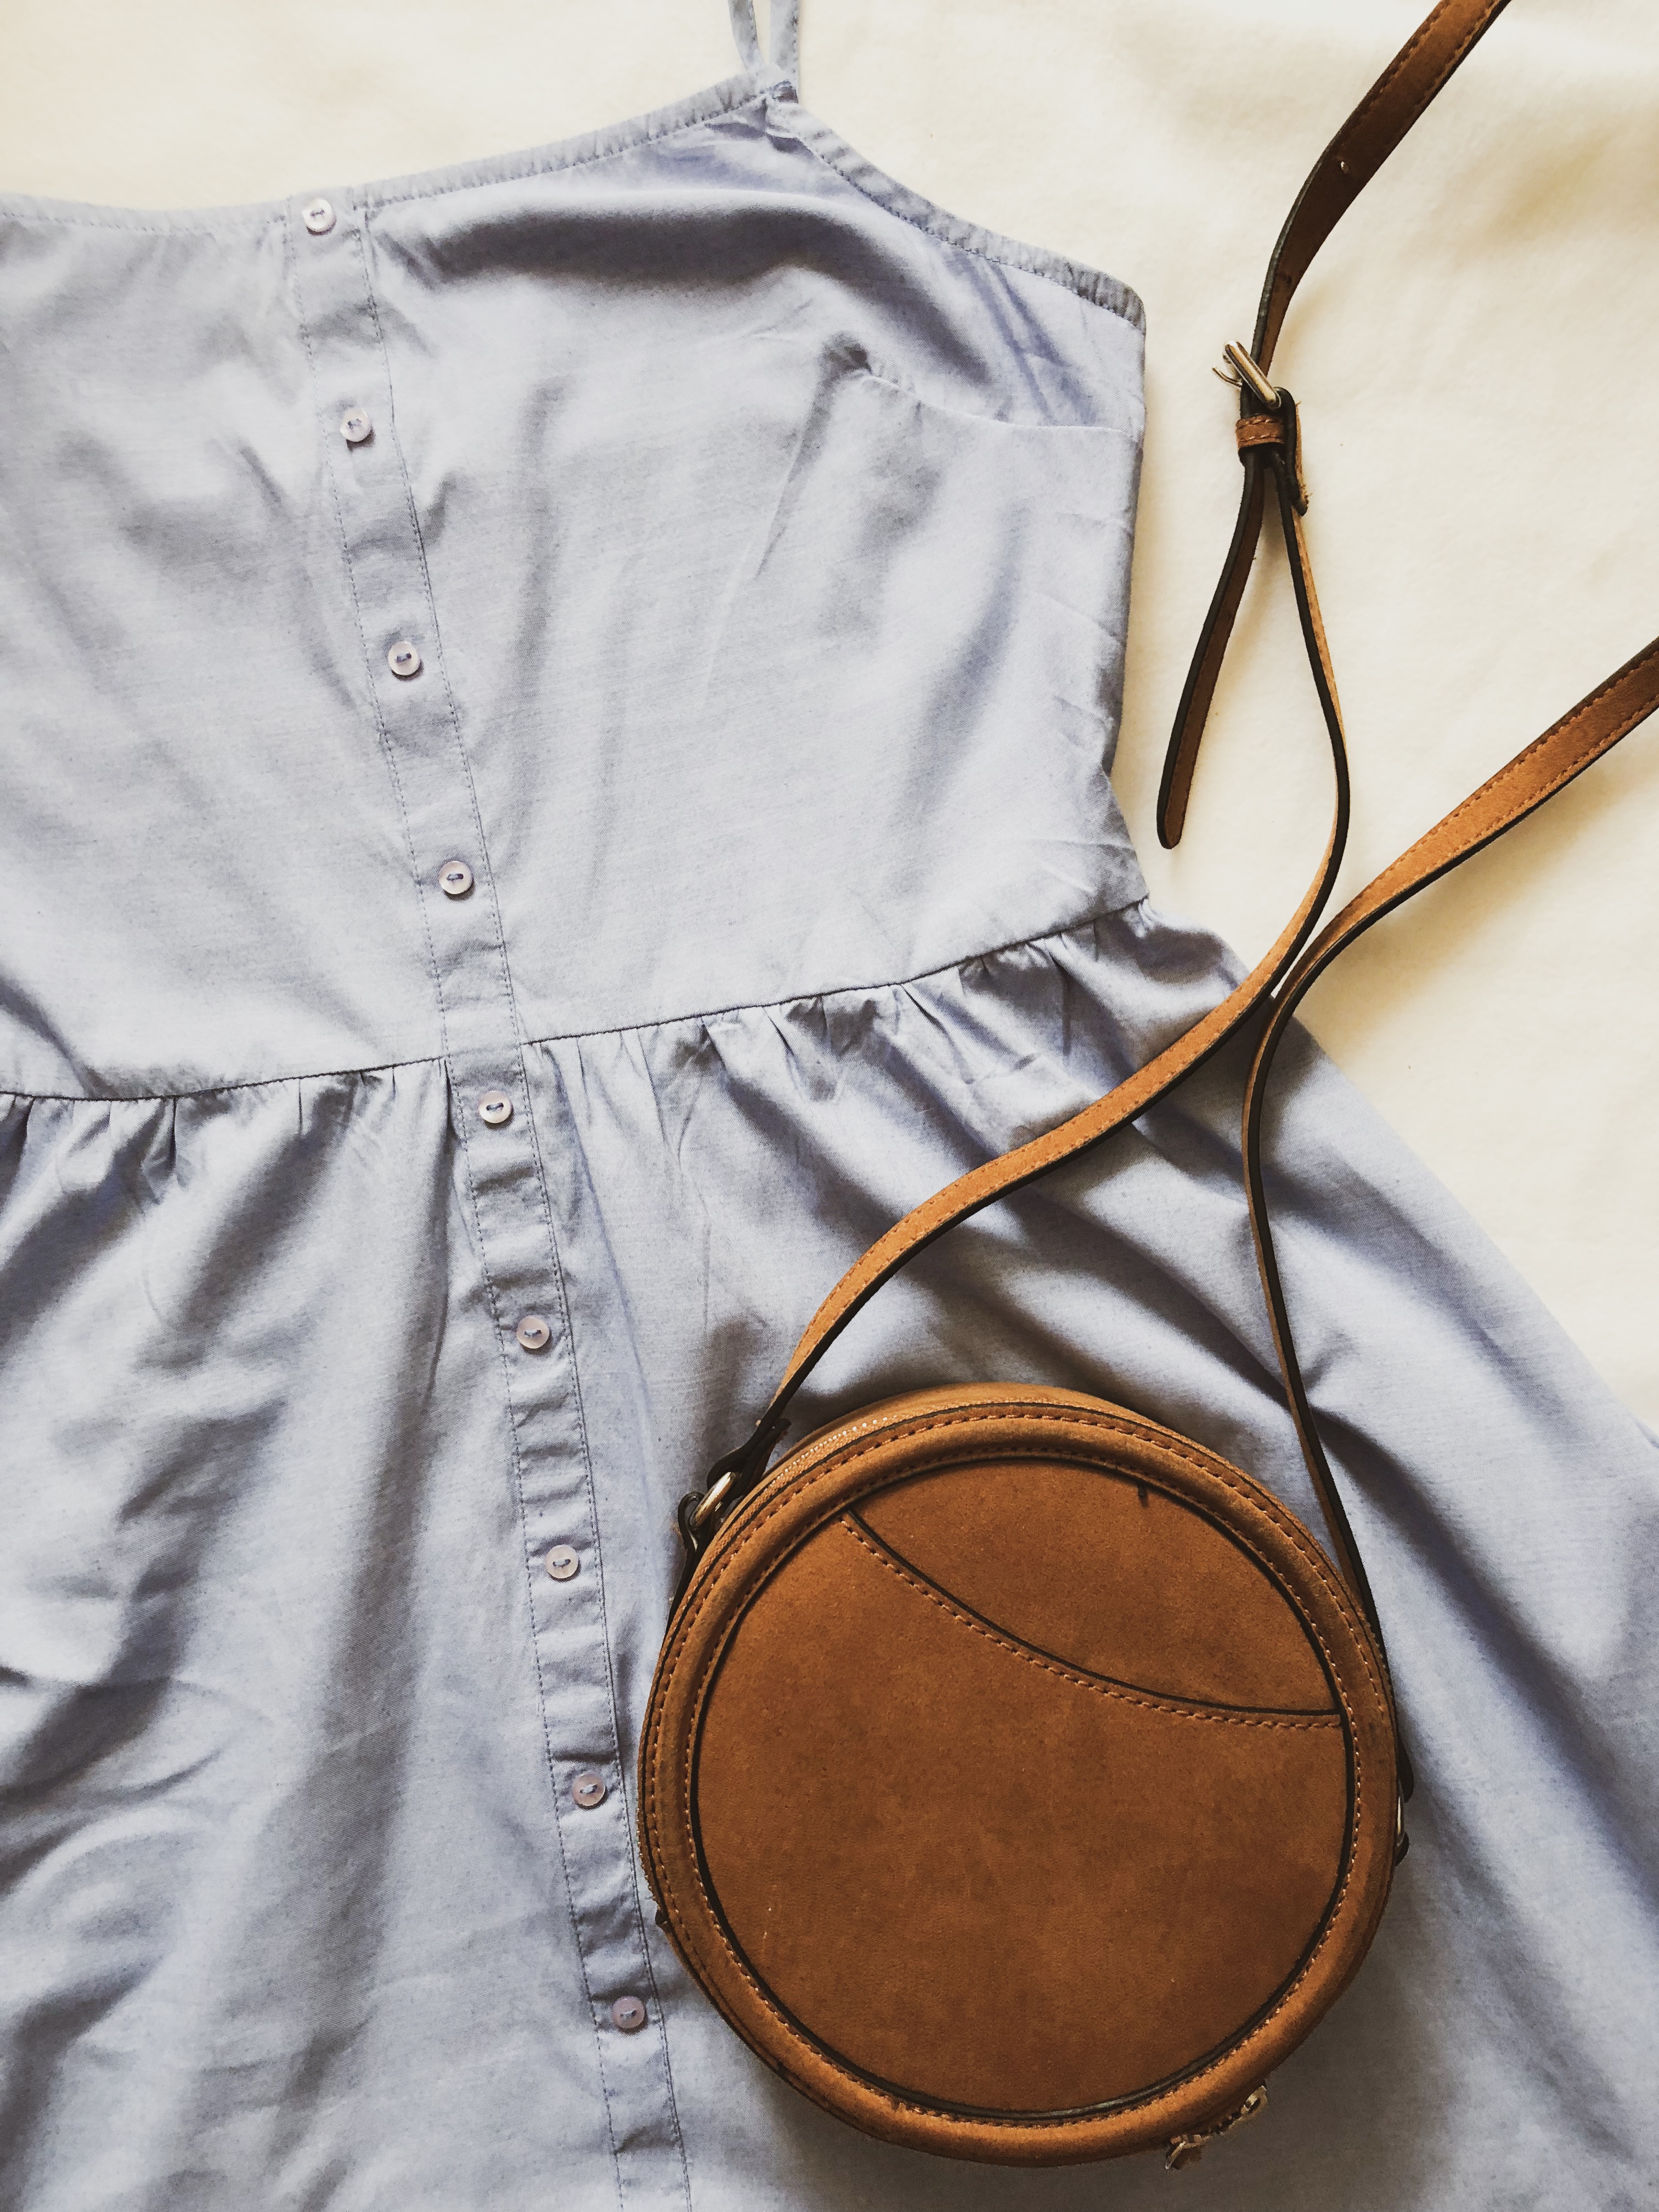 What I got in sales: Blue dress and brown round bag Pimkie